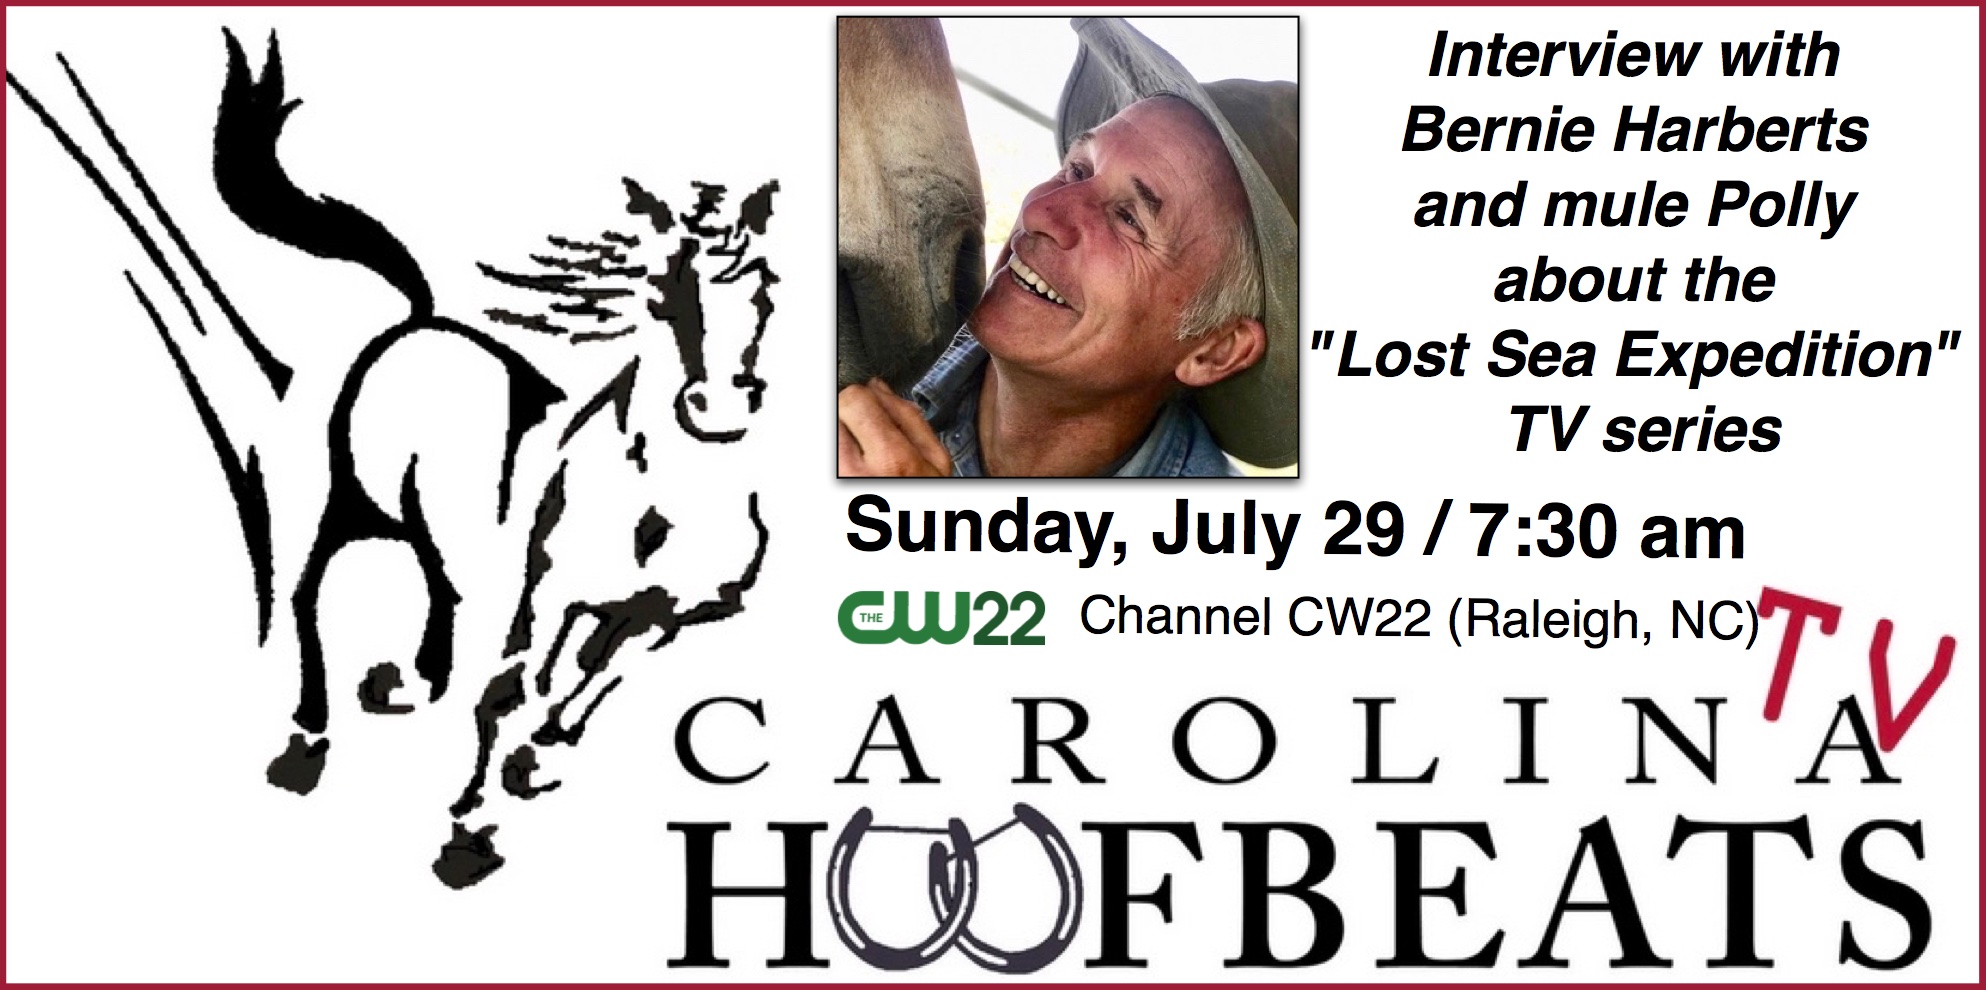 "Lost Sea Expedition" interview on "Carolina Hoofbeats" TV show